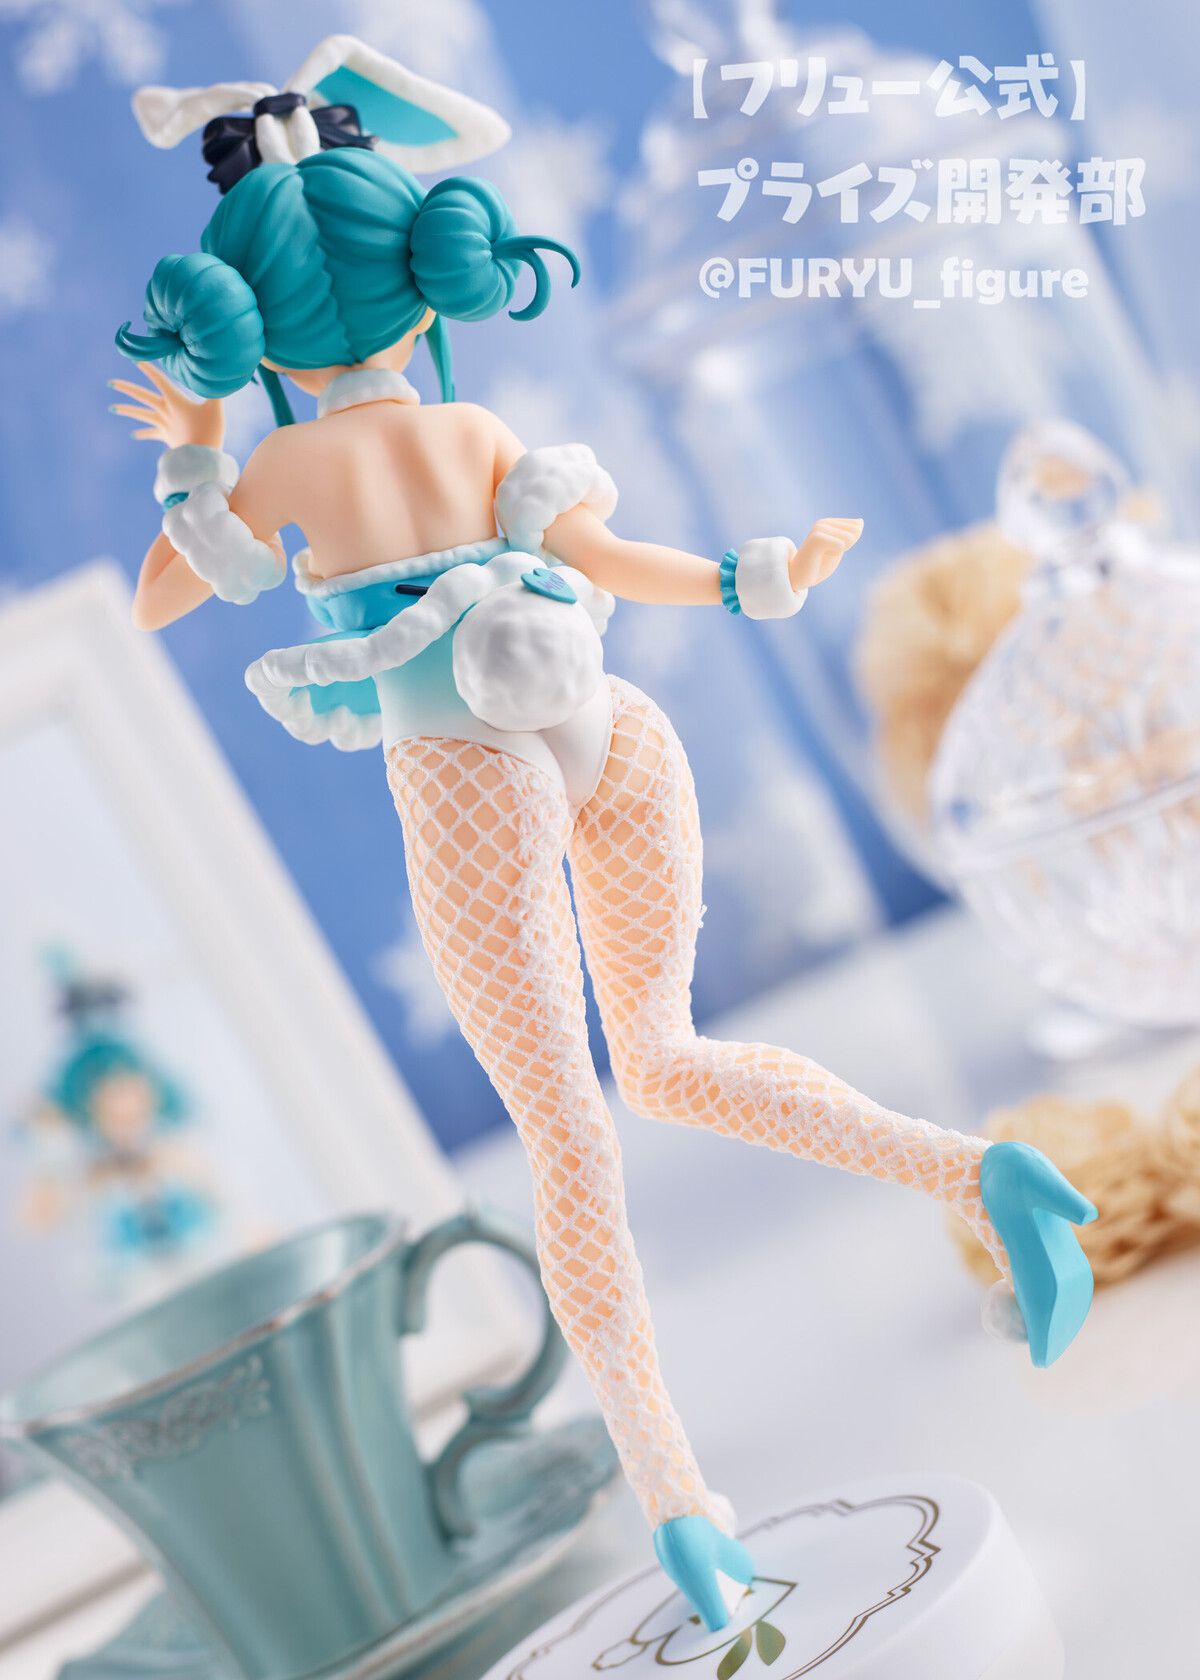 [Hatsune Miku] Erotic figure of the bunny figure of the and thighs of the muchimuchi drawn by Anmi teacher! 7